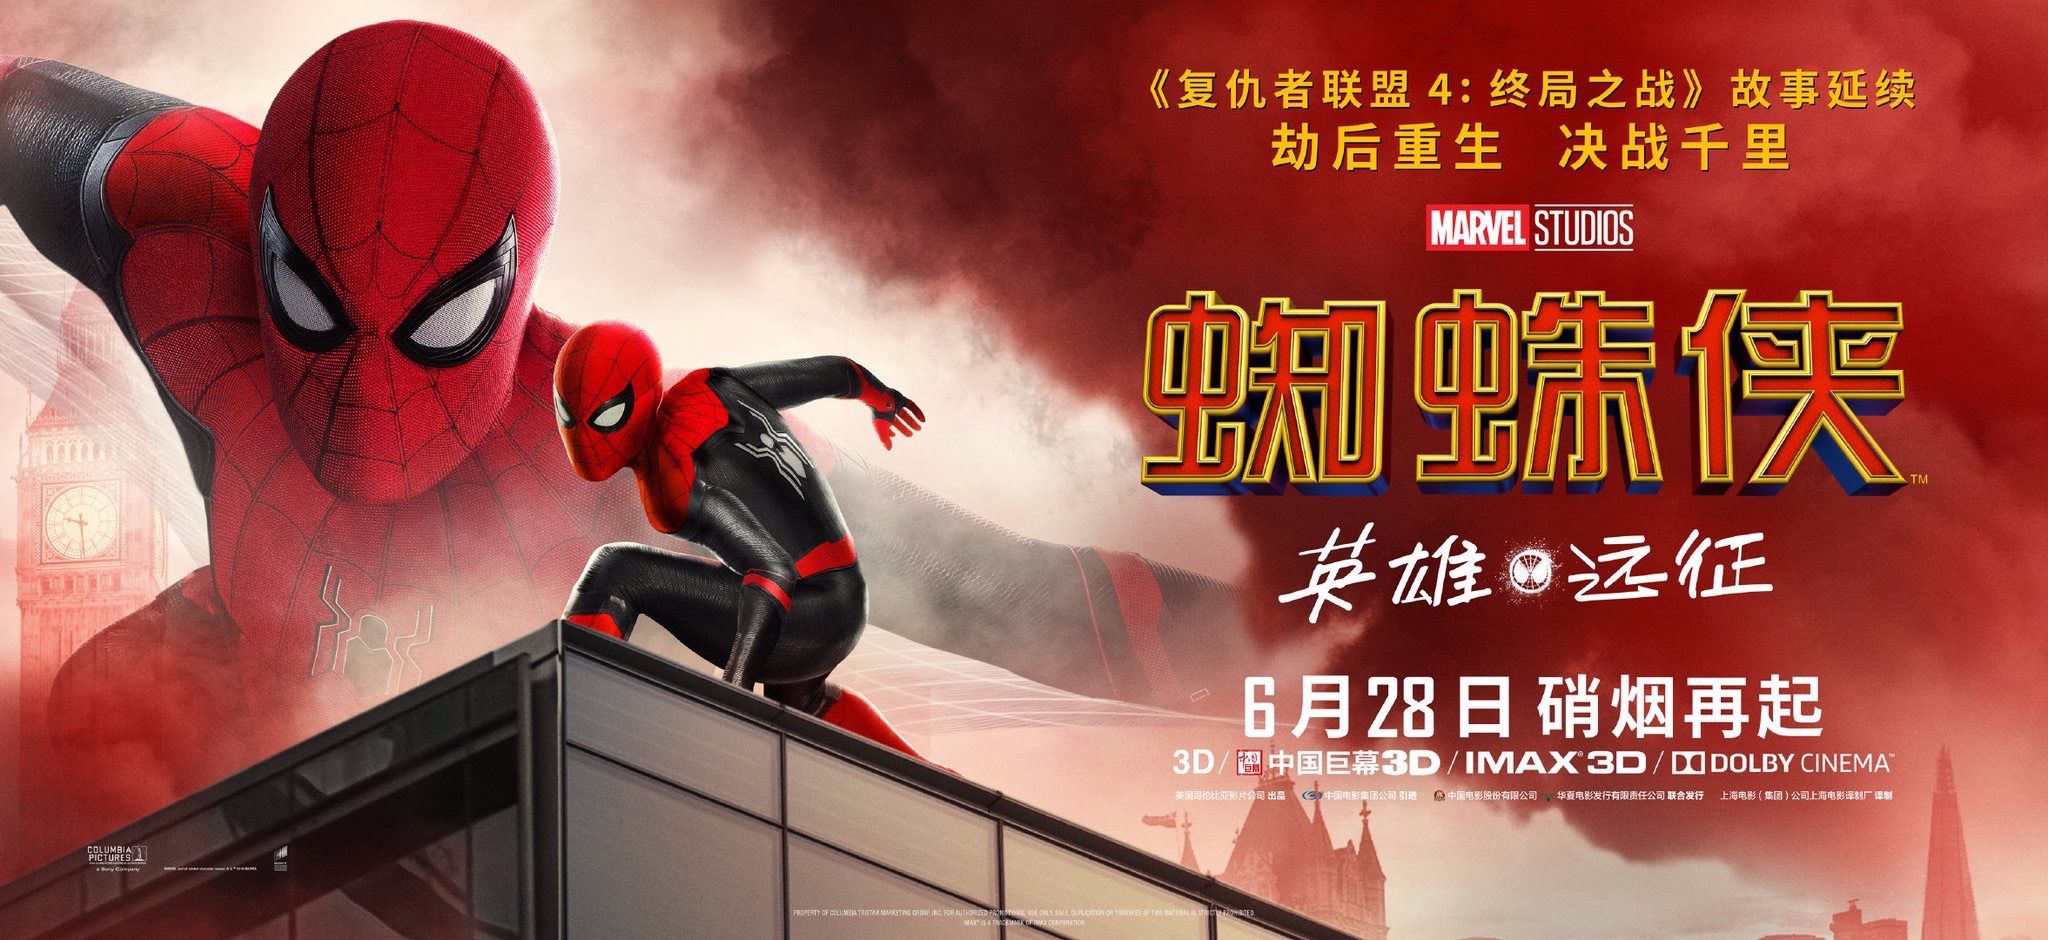 Spider-Man Far from Home Banner #3